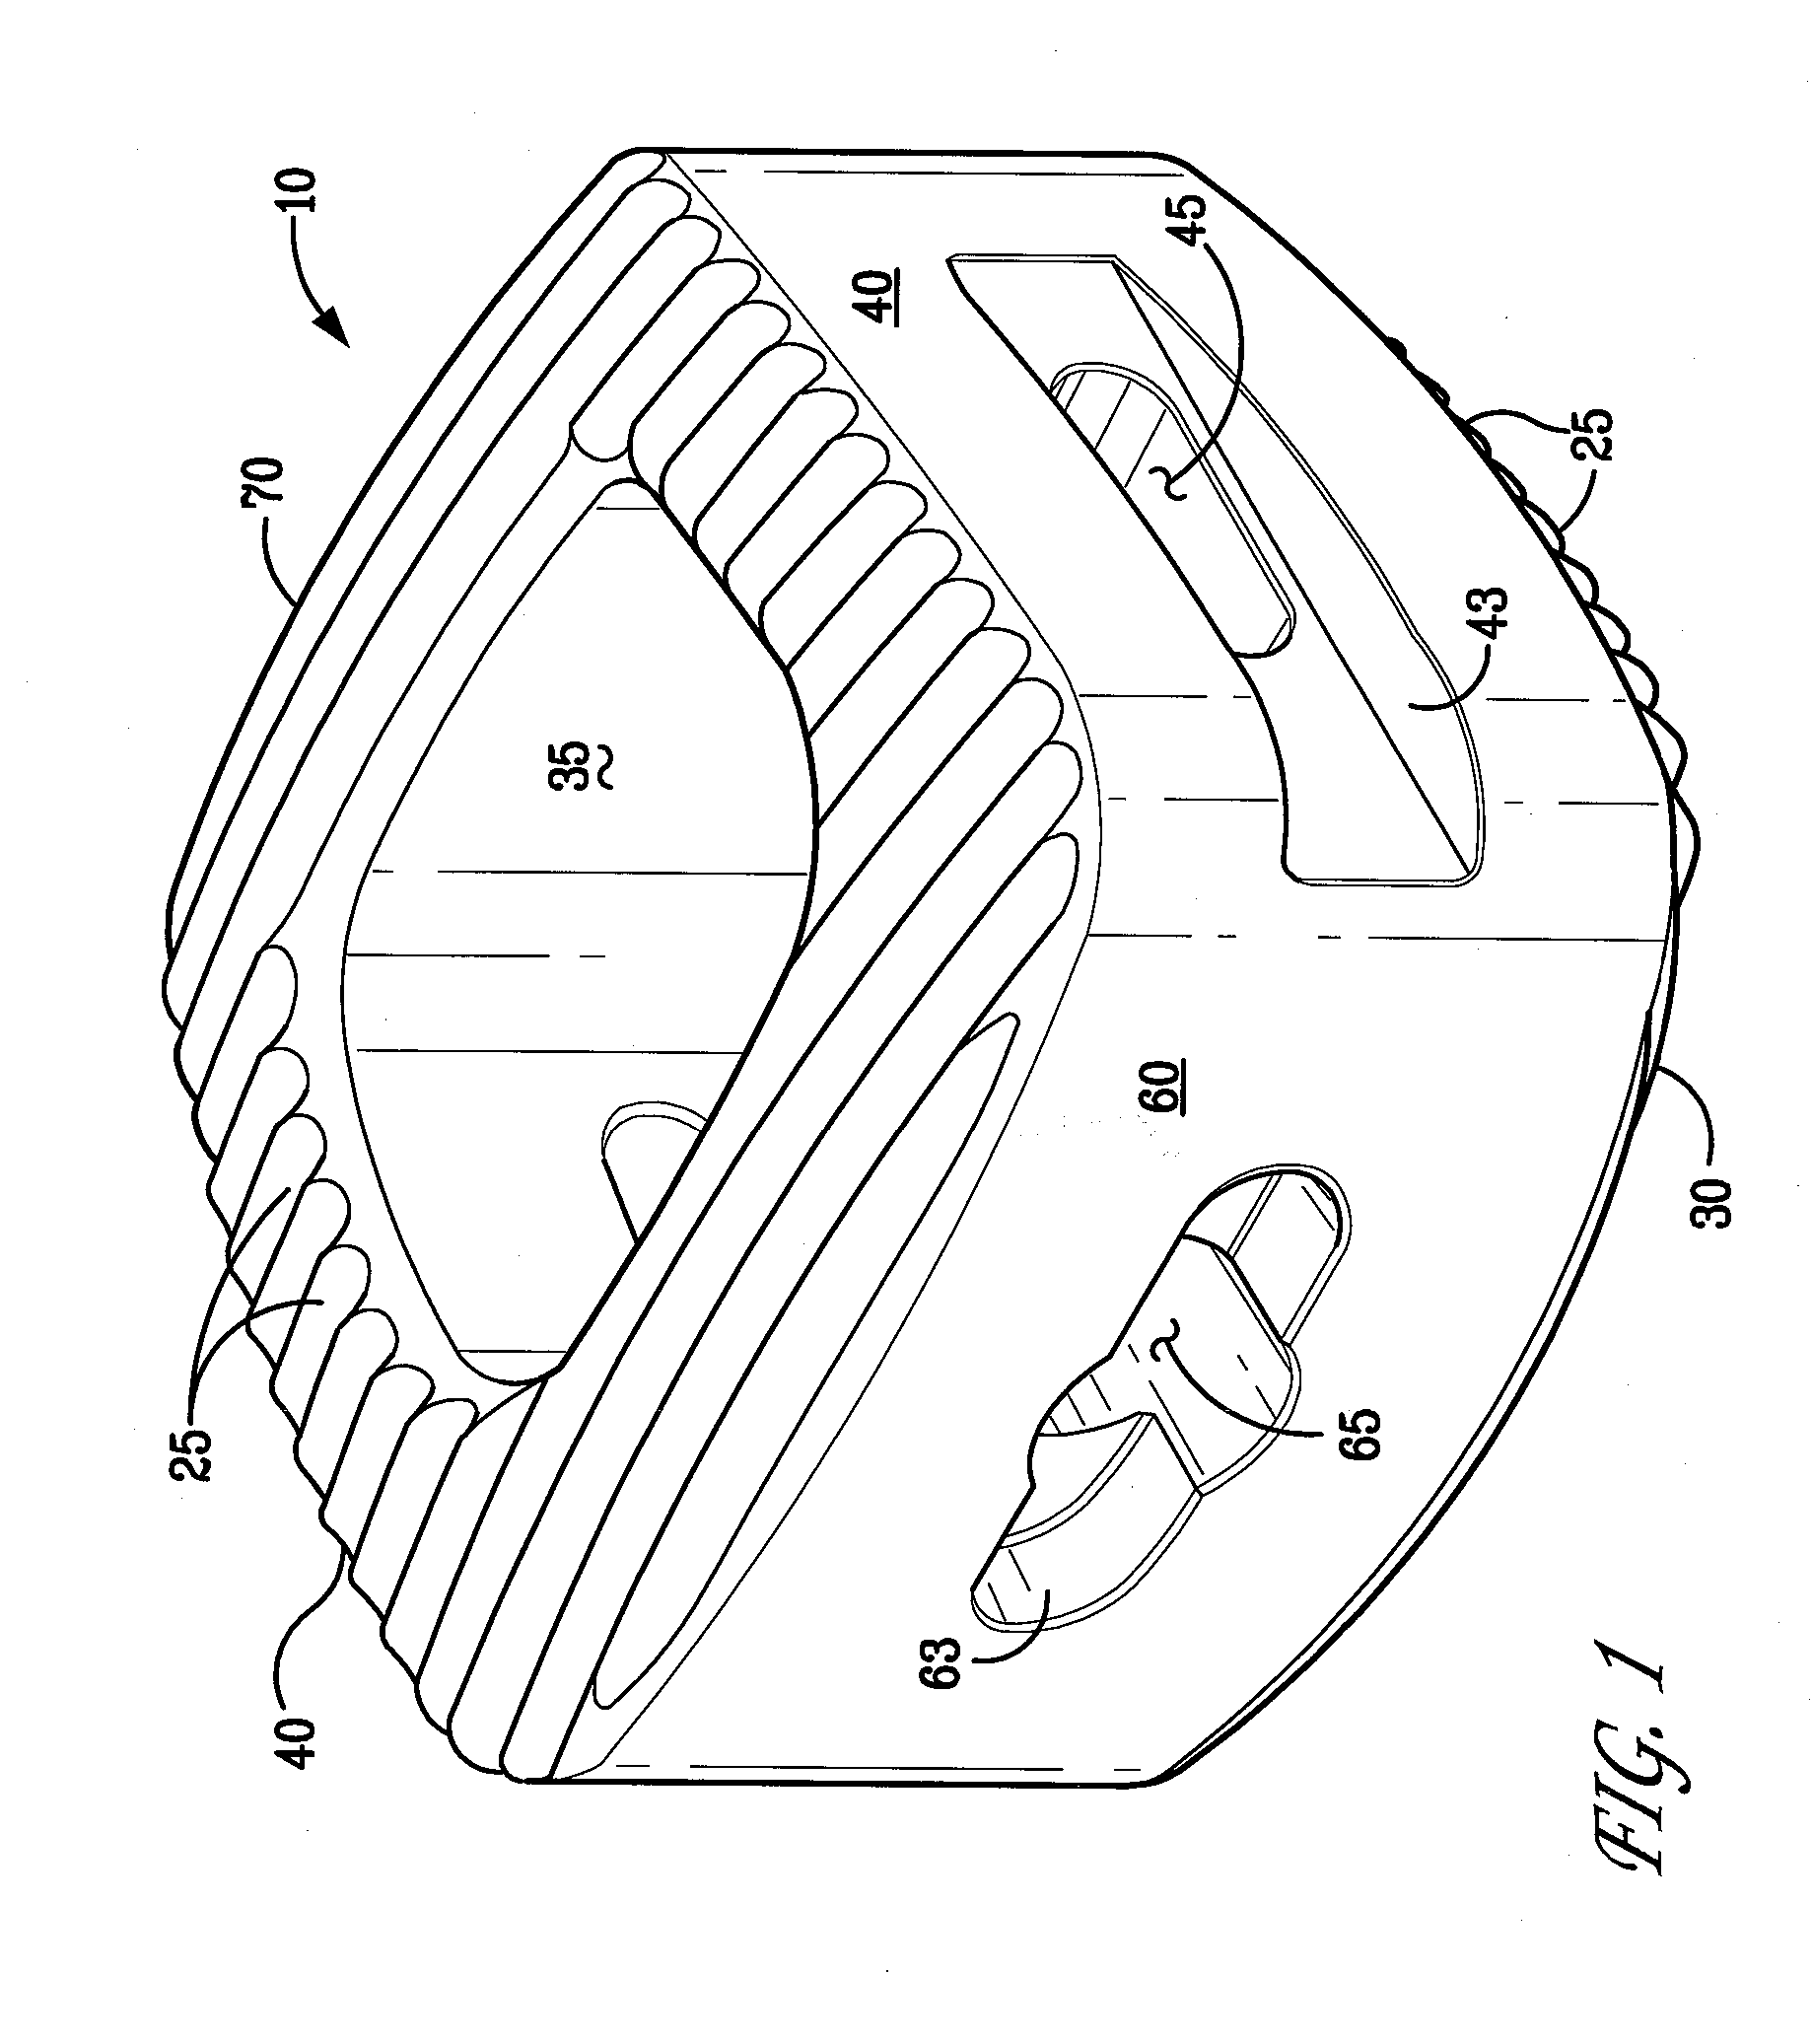 Bioactive Spinal Implants and Method of Manufacture Thereof